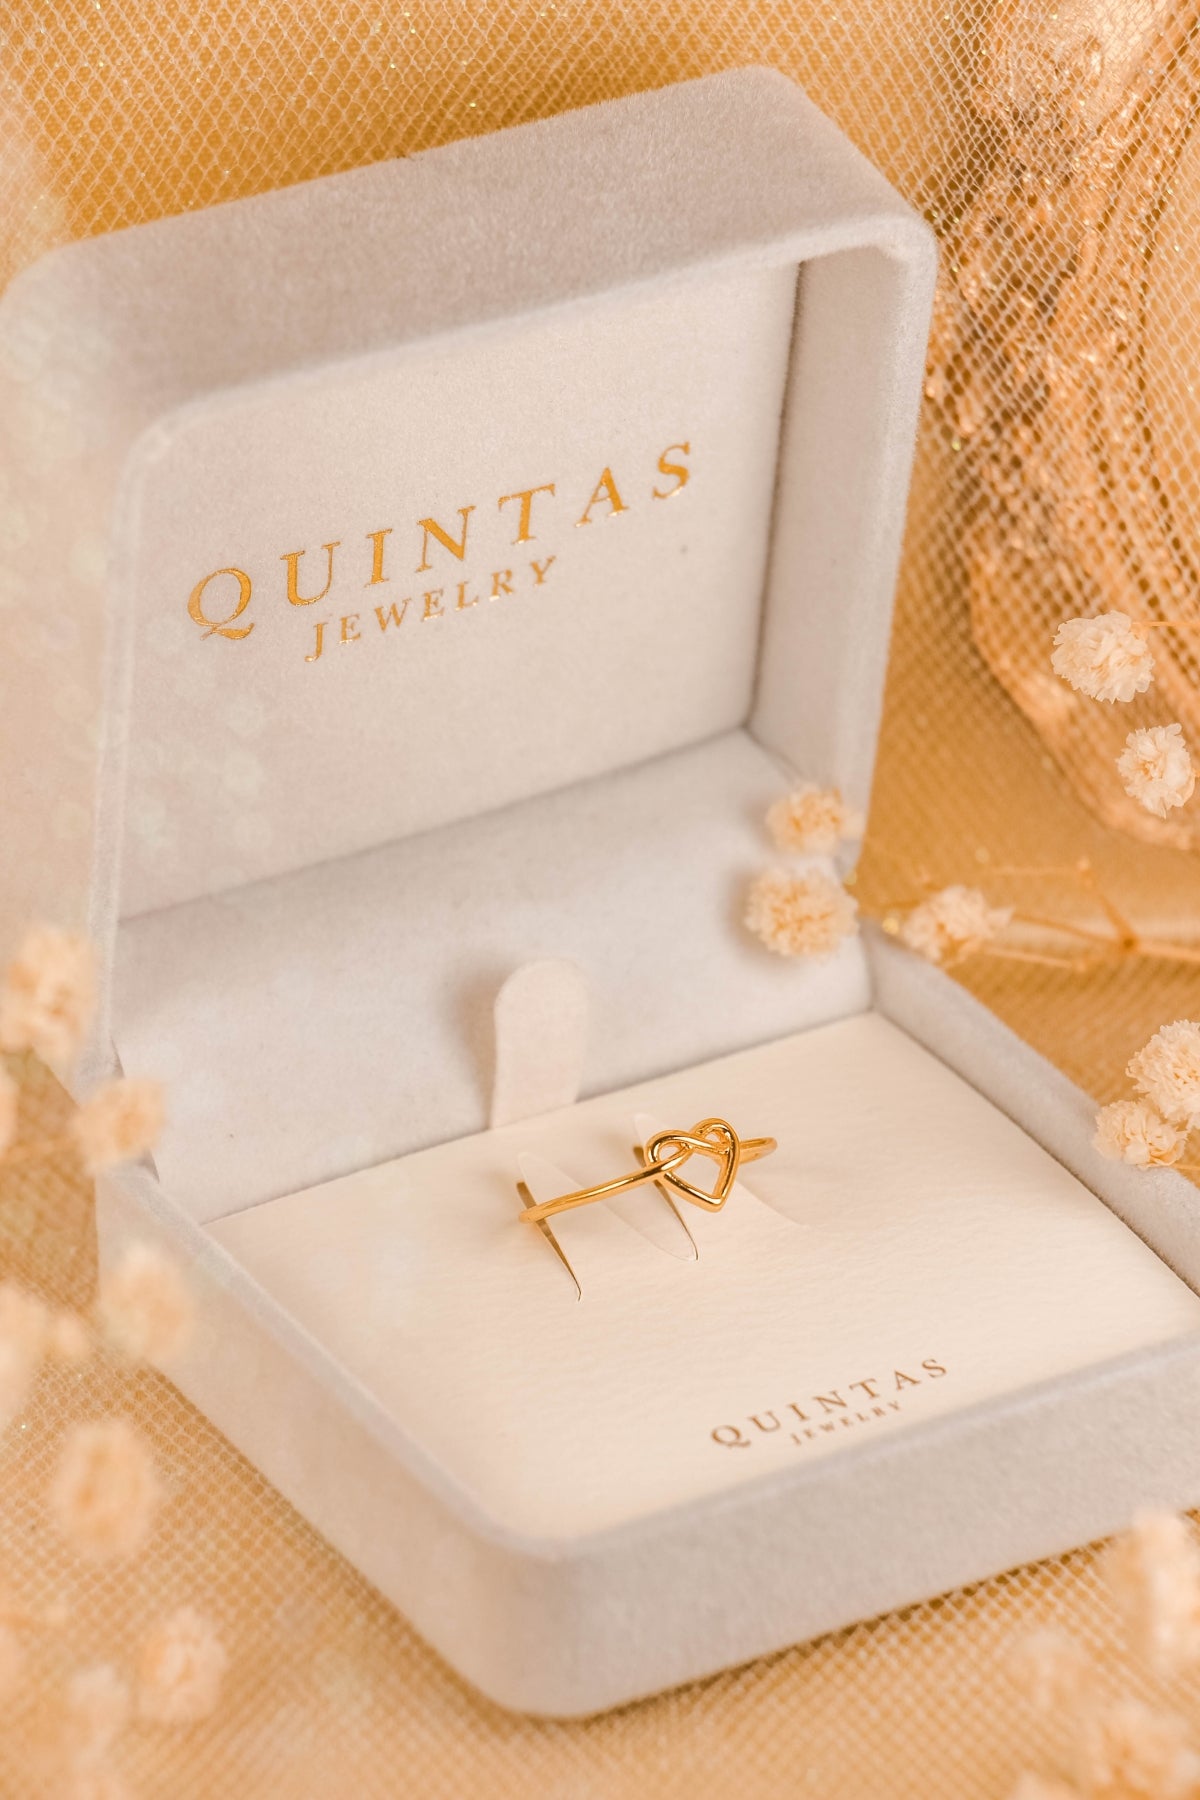 Heart Knot Ring by QUINTAS (Adjustable)